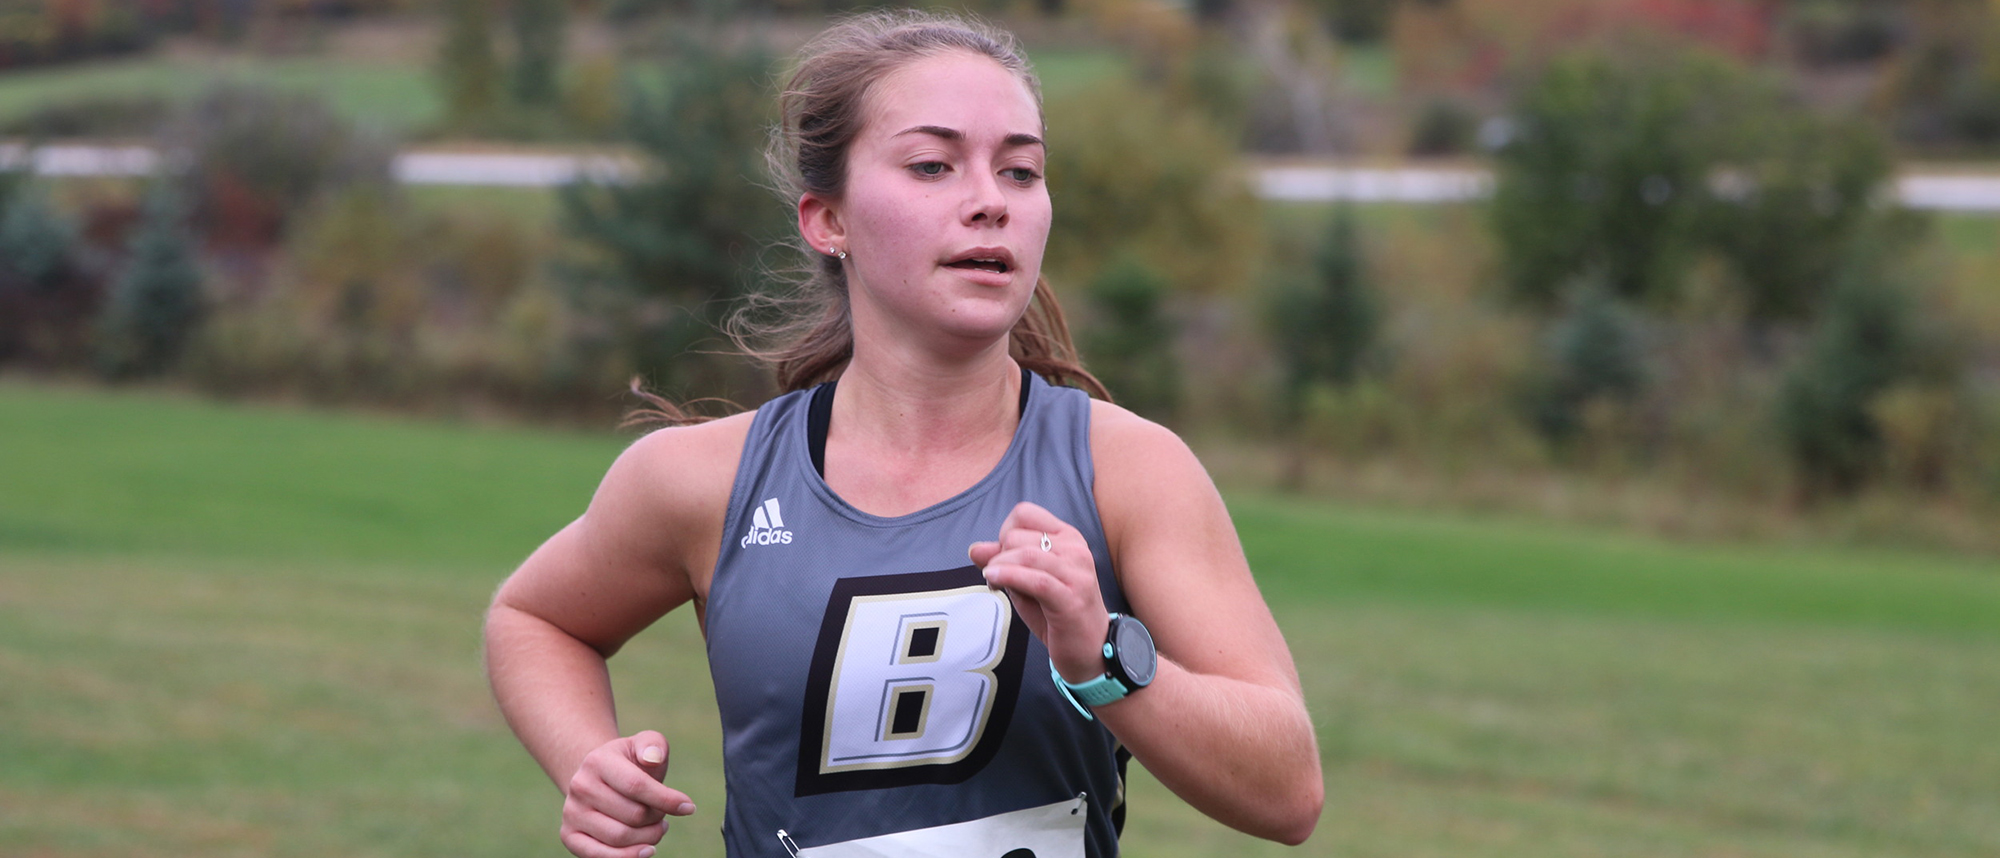 Bryant travels to Vermont for Fall Foliage Invite